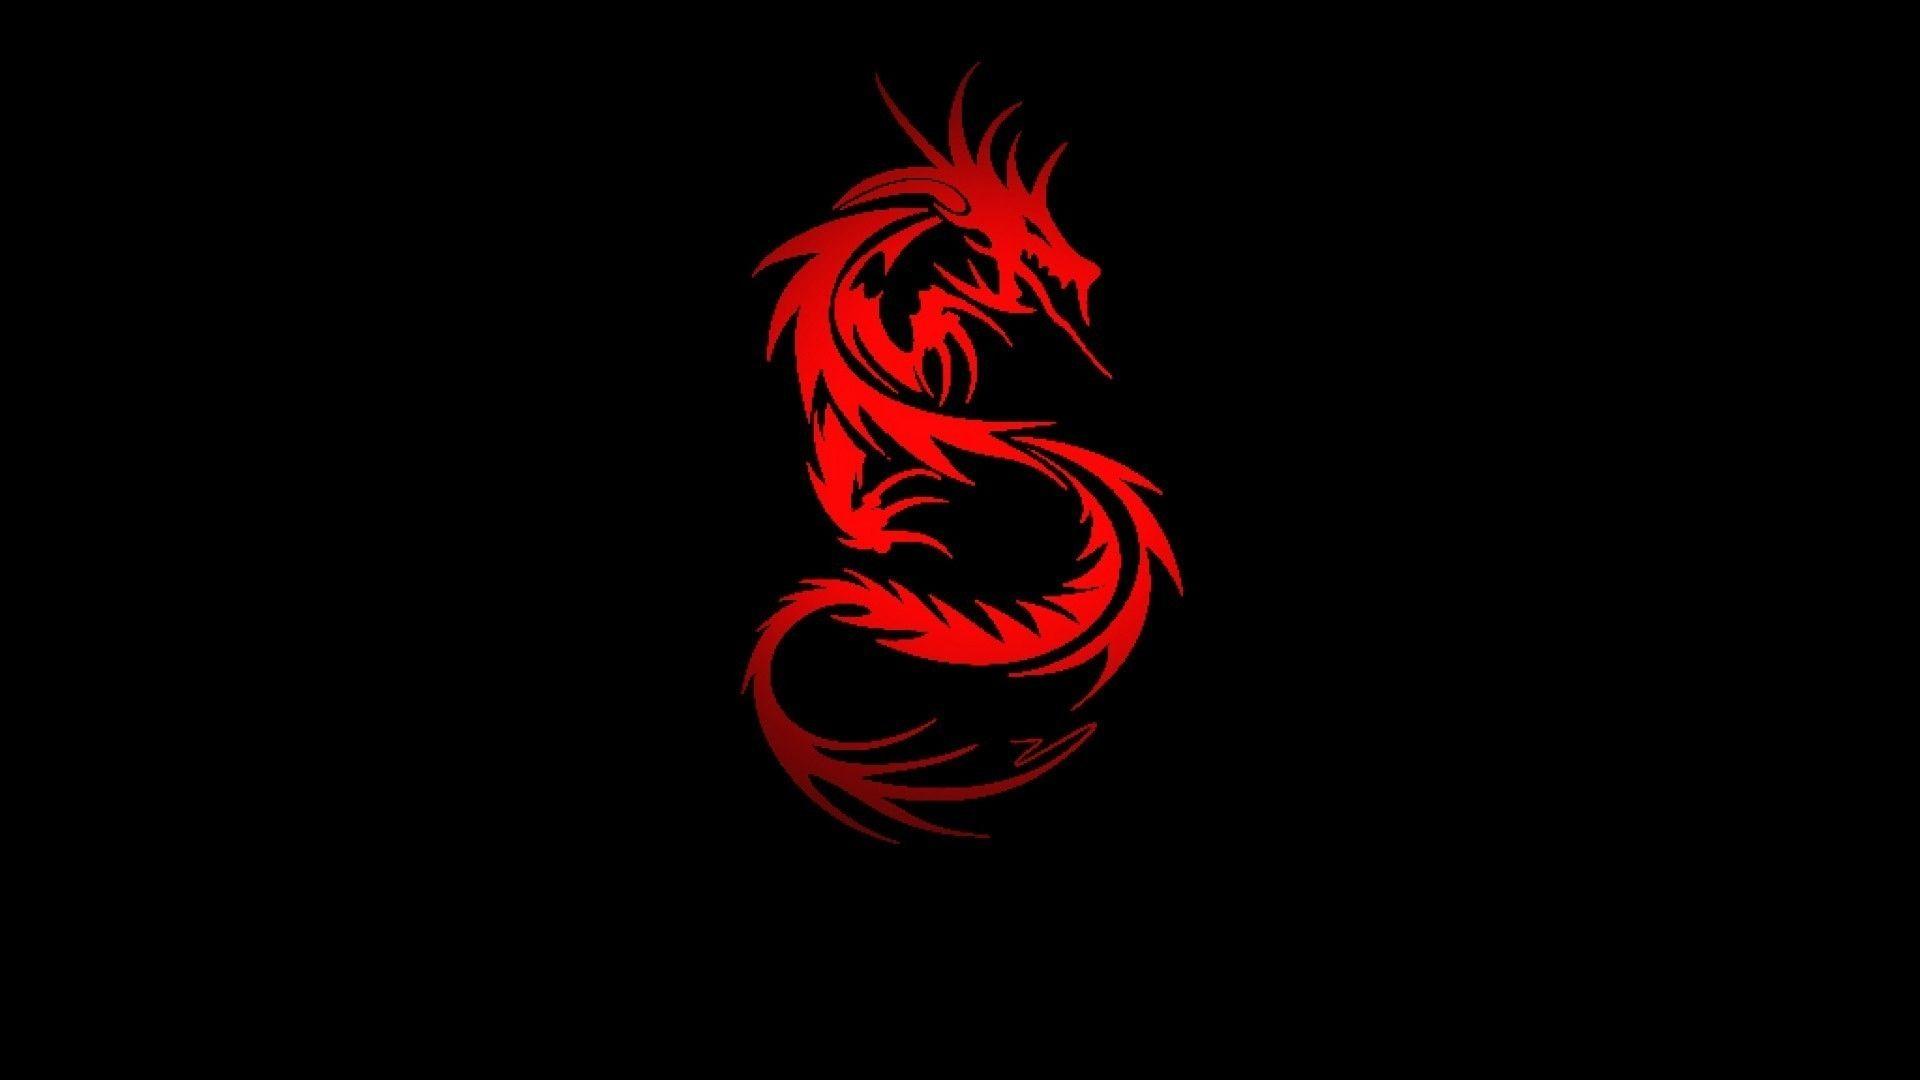 Top Red Black Dragon Wallpaper FULL HD 1920×1080 For PC